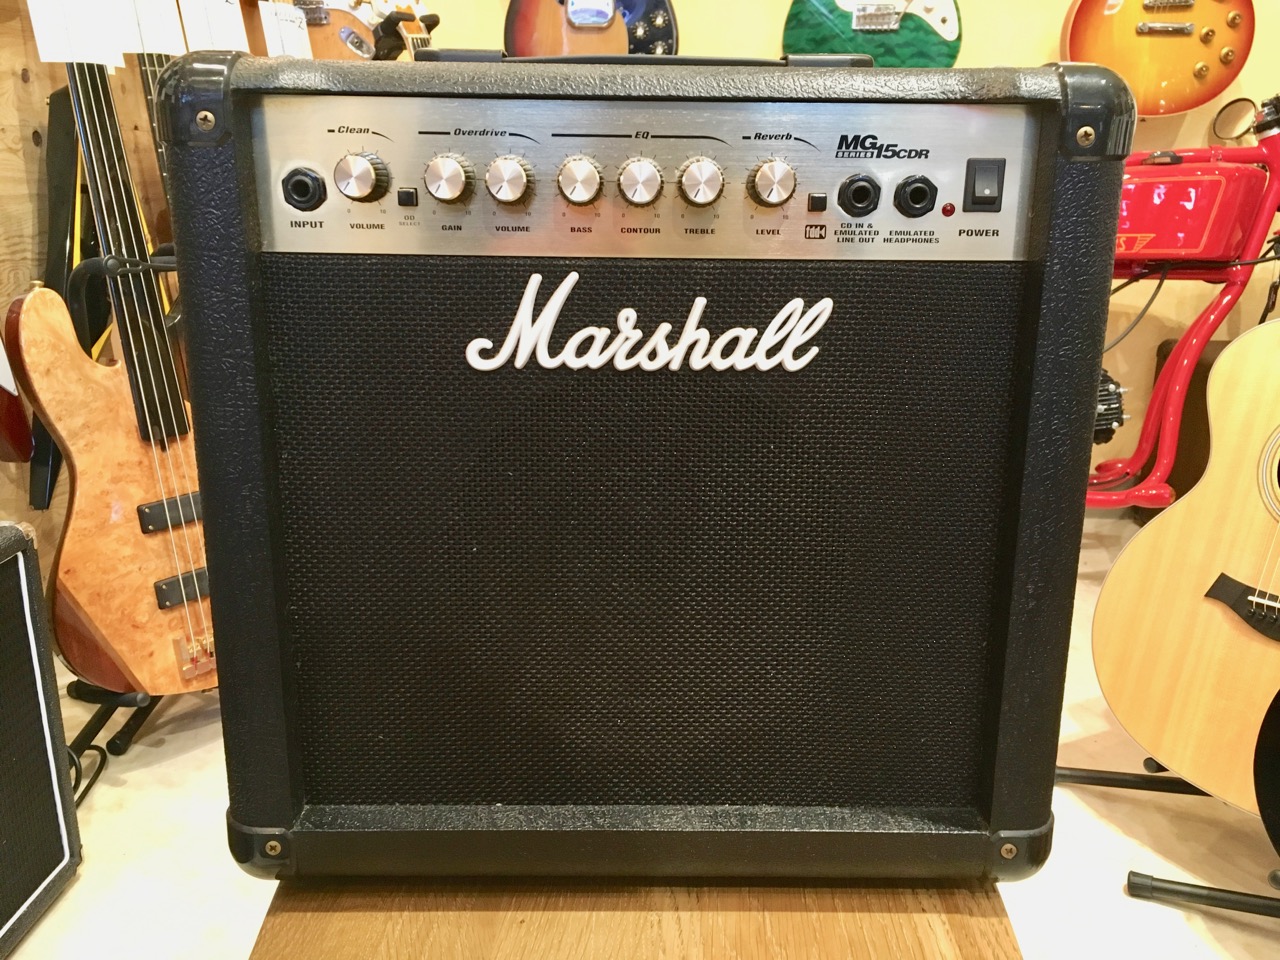 Marshall MG15CDR | LINER NOTES